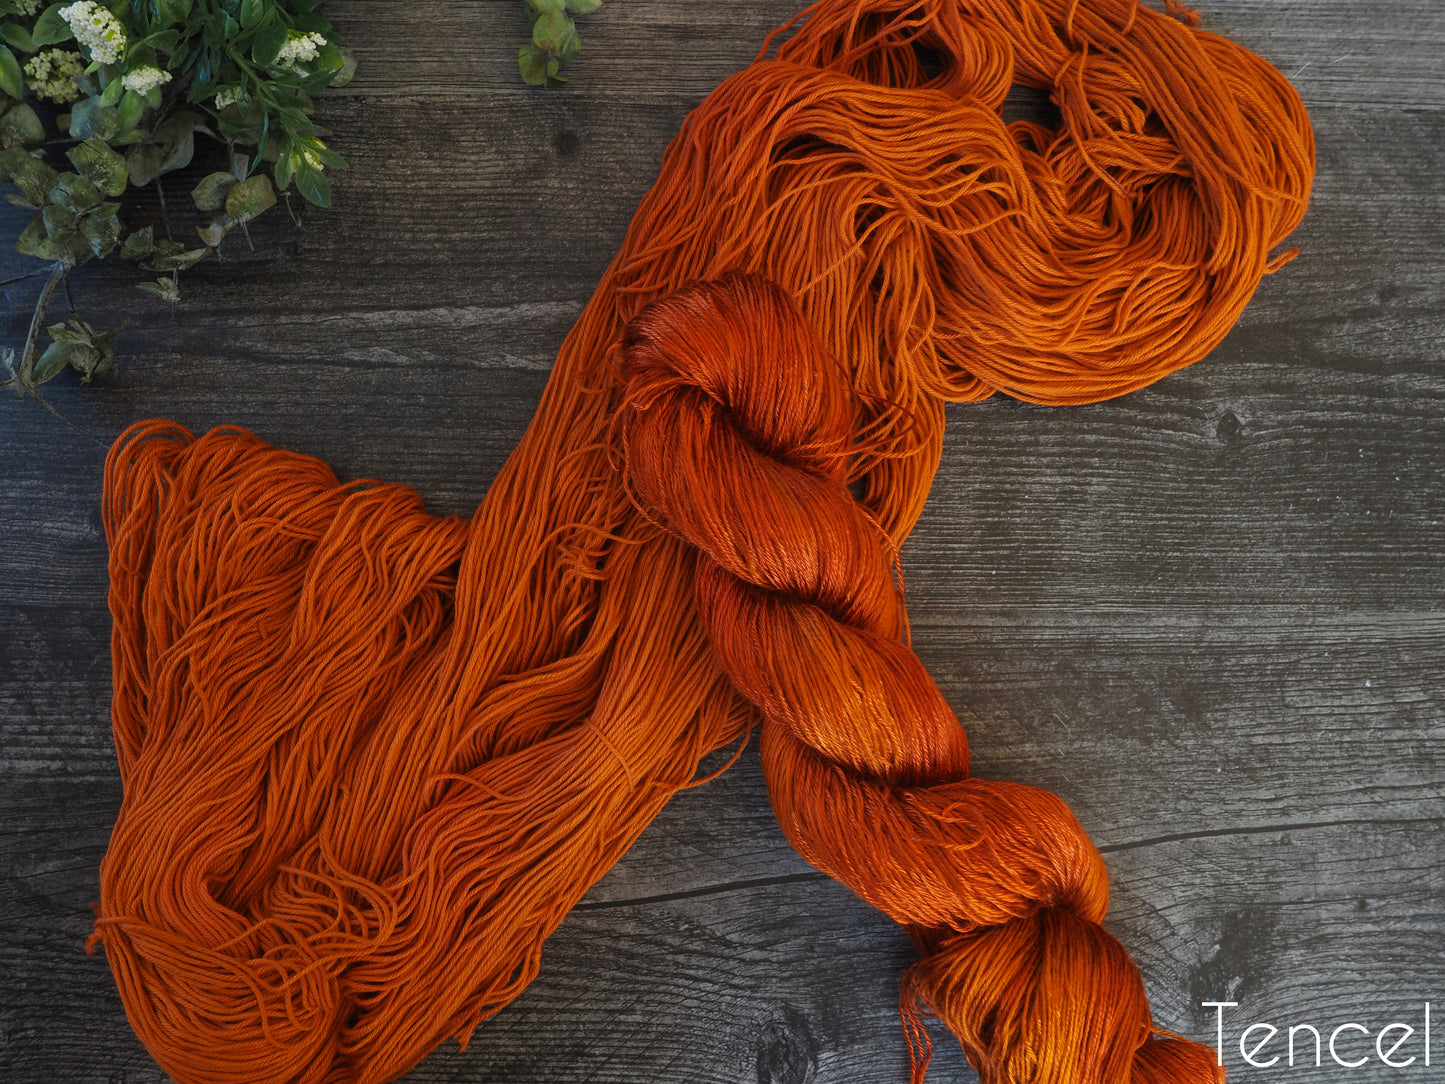 Jack O' Lantern  - Dyed to Order - *Please allow 4-6 weeks for dyeing*